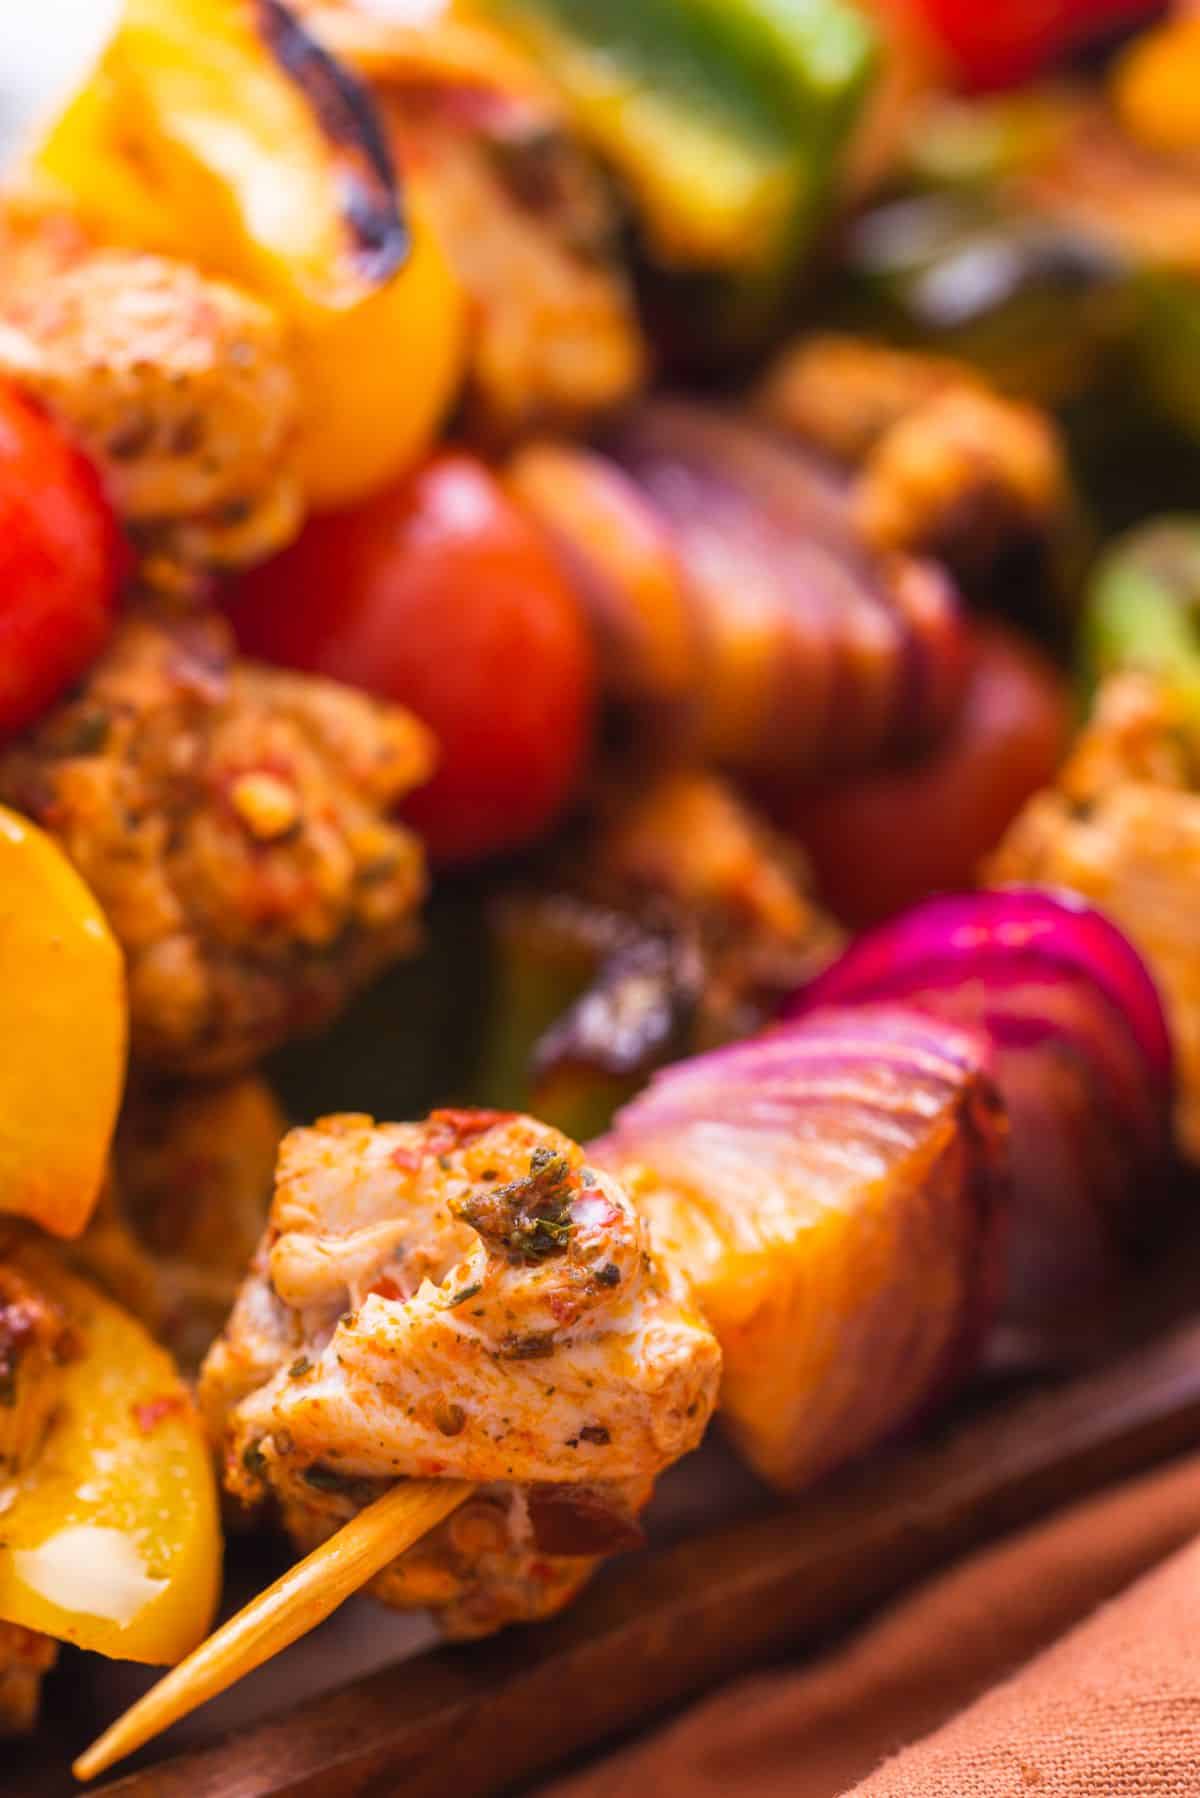 grilled chicken and vegetables on skewers